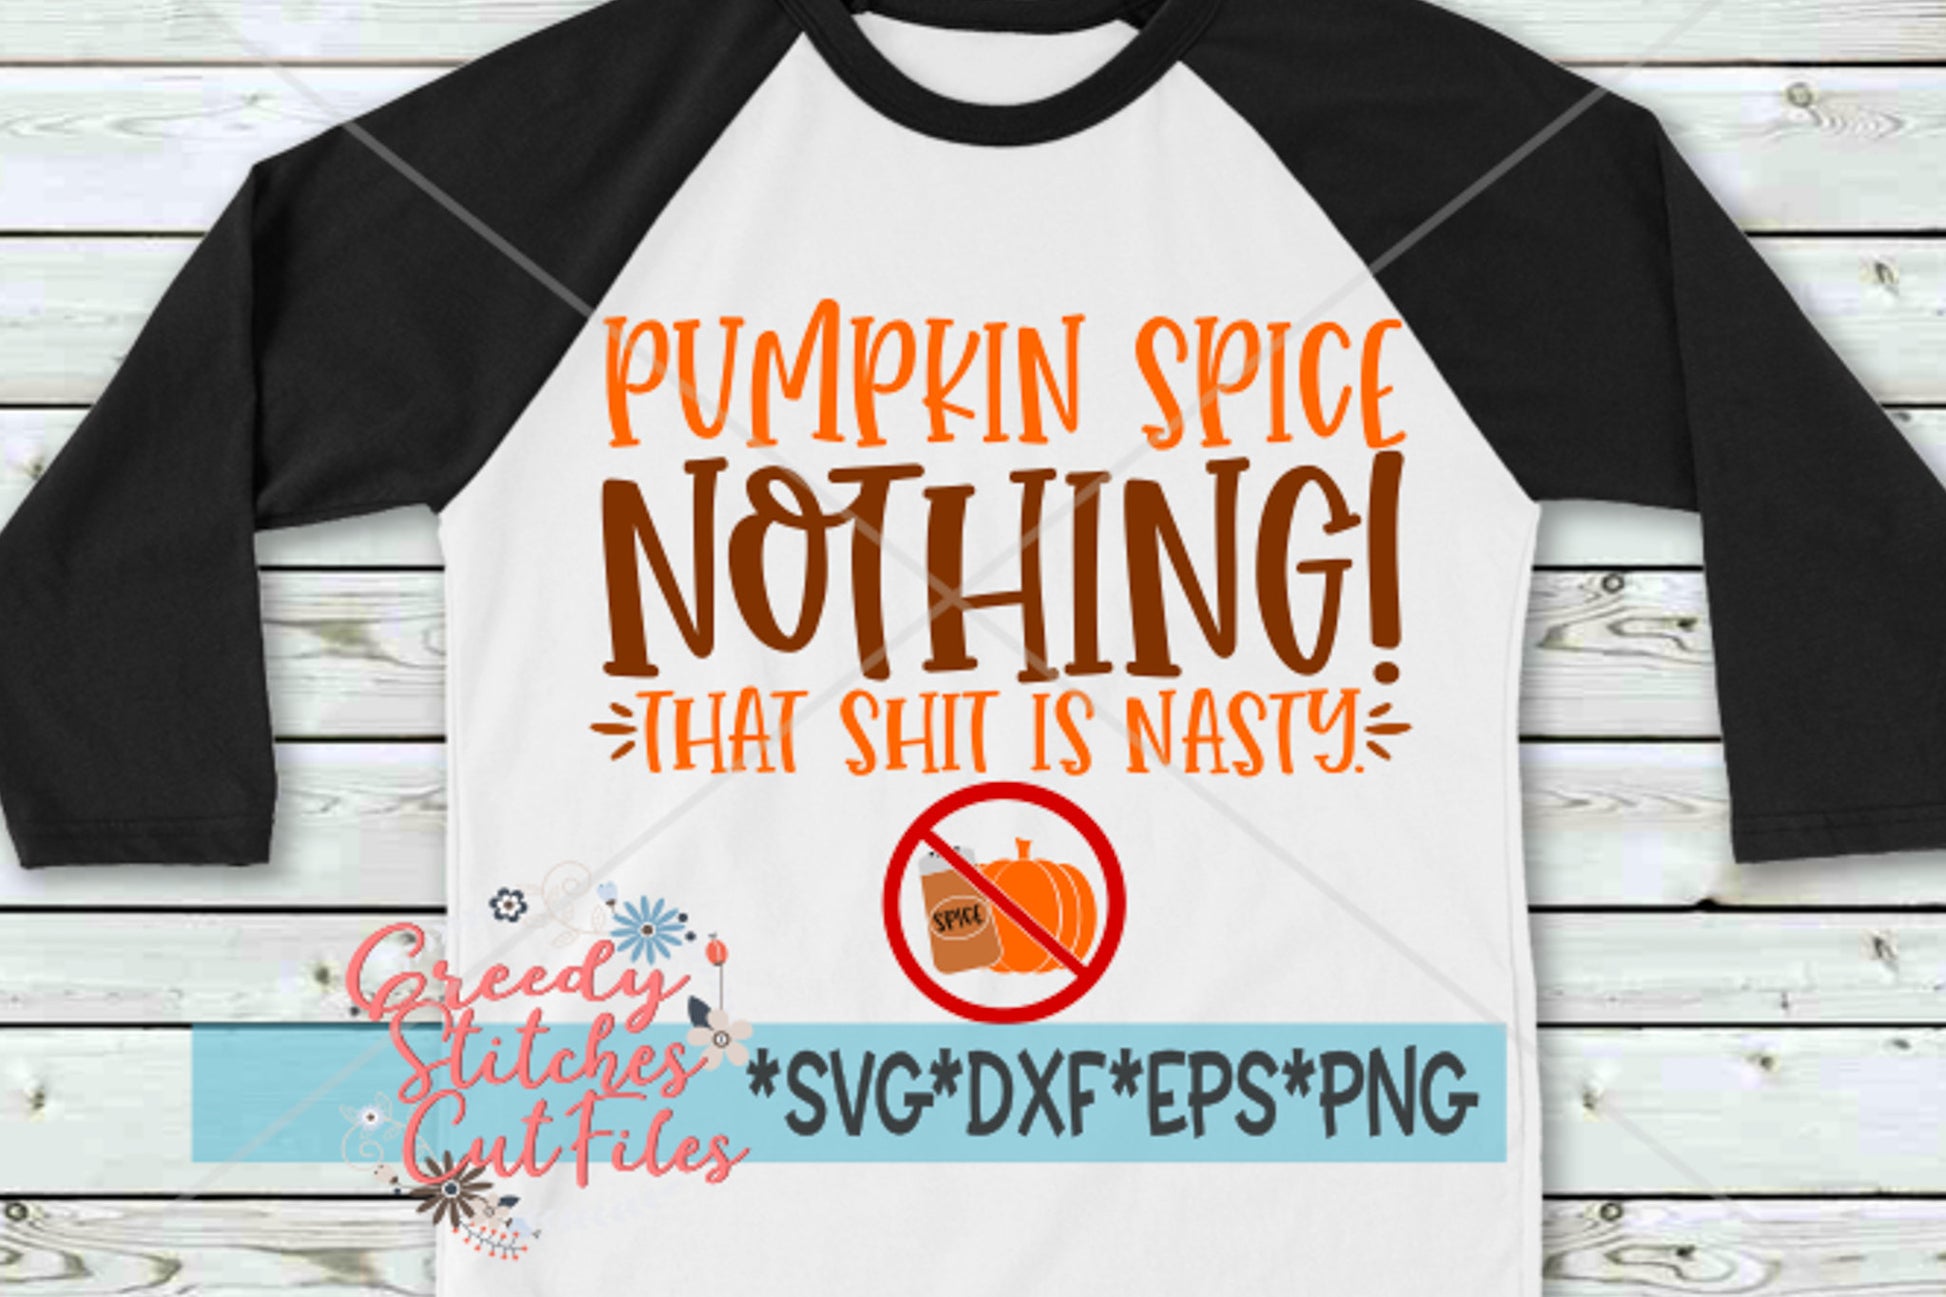 Pumpkin Spice Nothing! That Shit Is Nasty svg dxf eps png. Pumpkin Spice SvG | Fall DxF | Hate Pumpkin Spice SvG | Instant Download Cut File